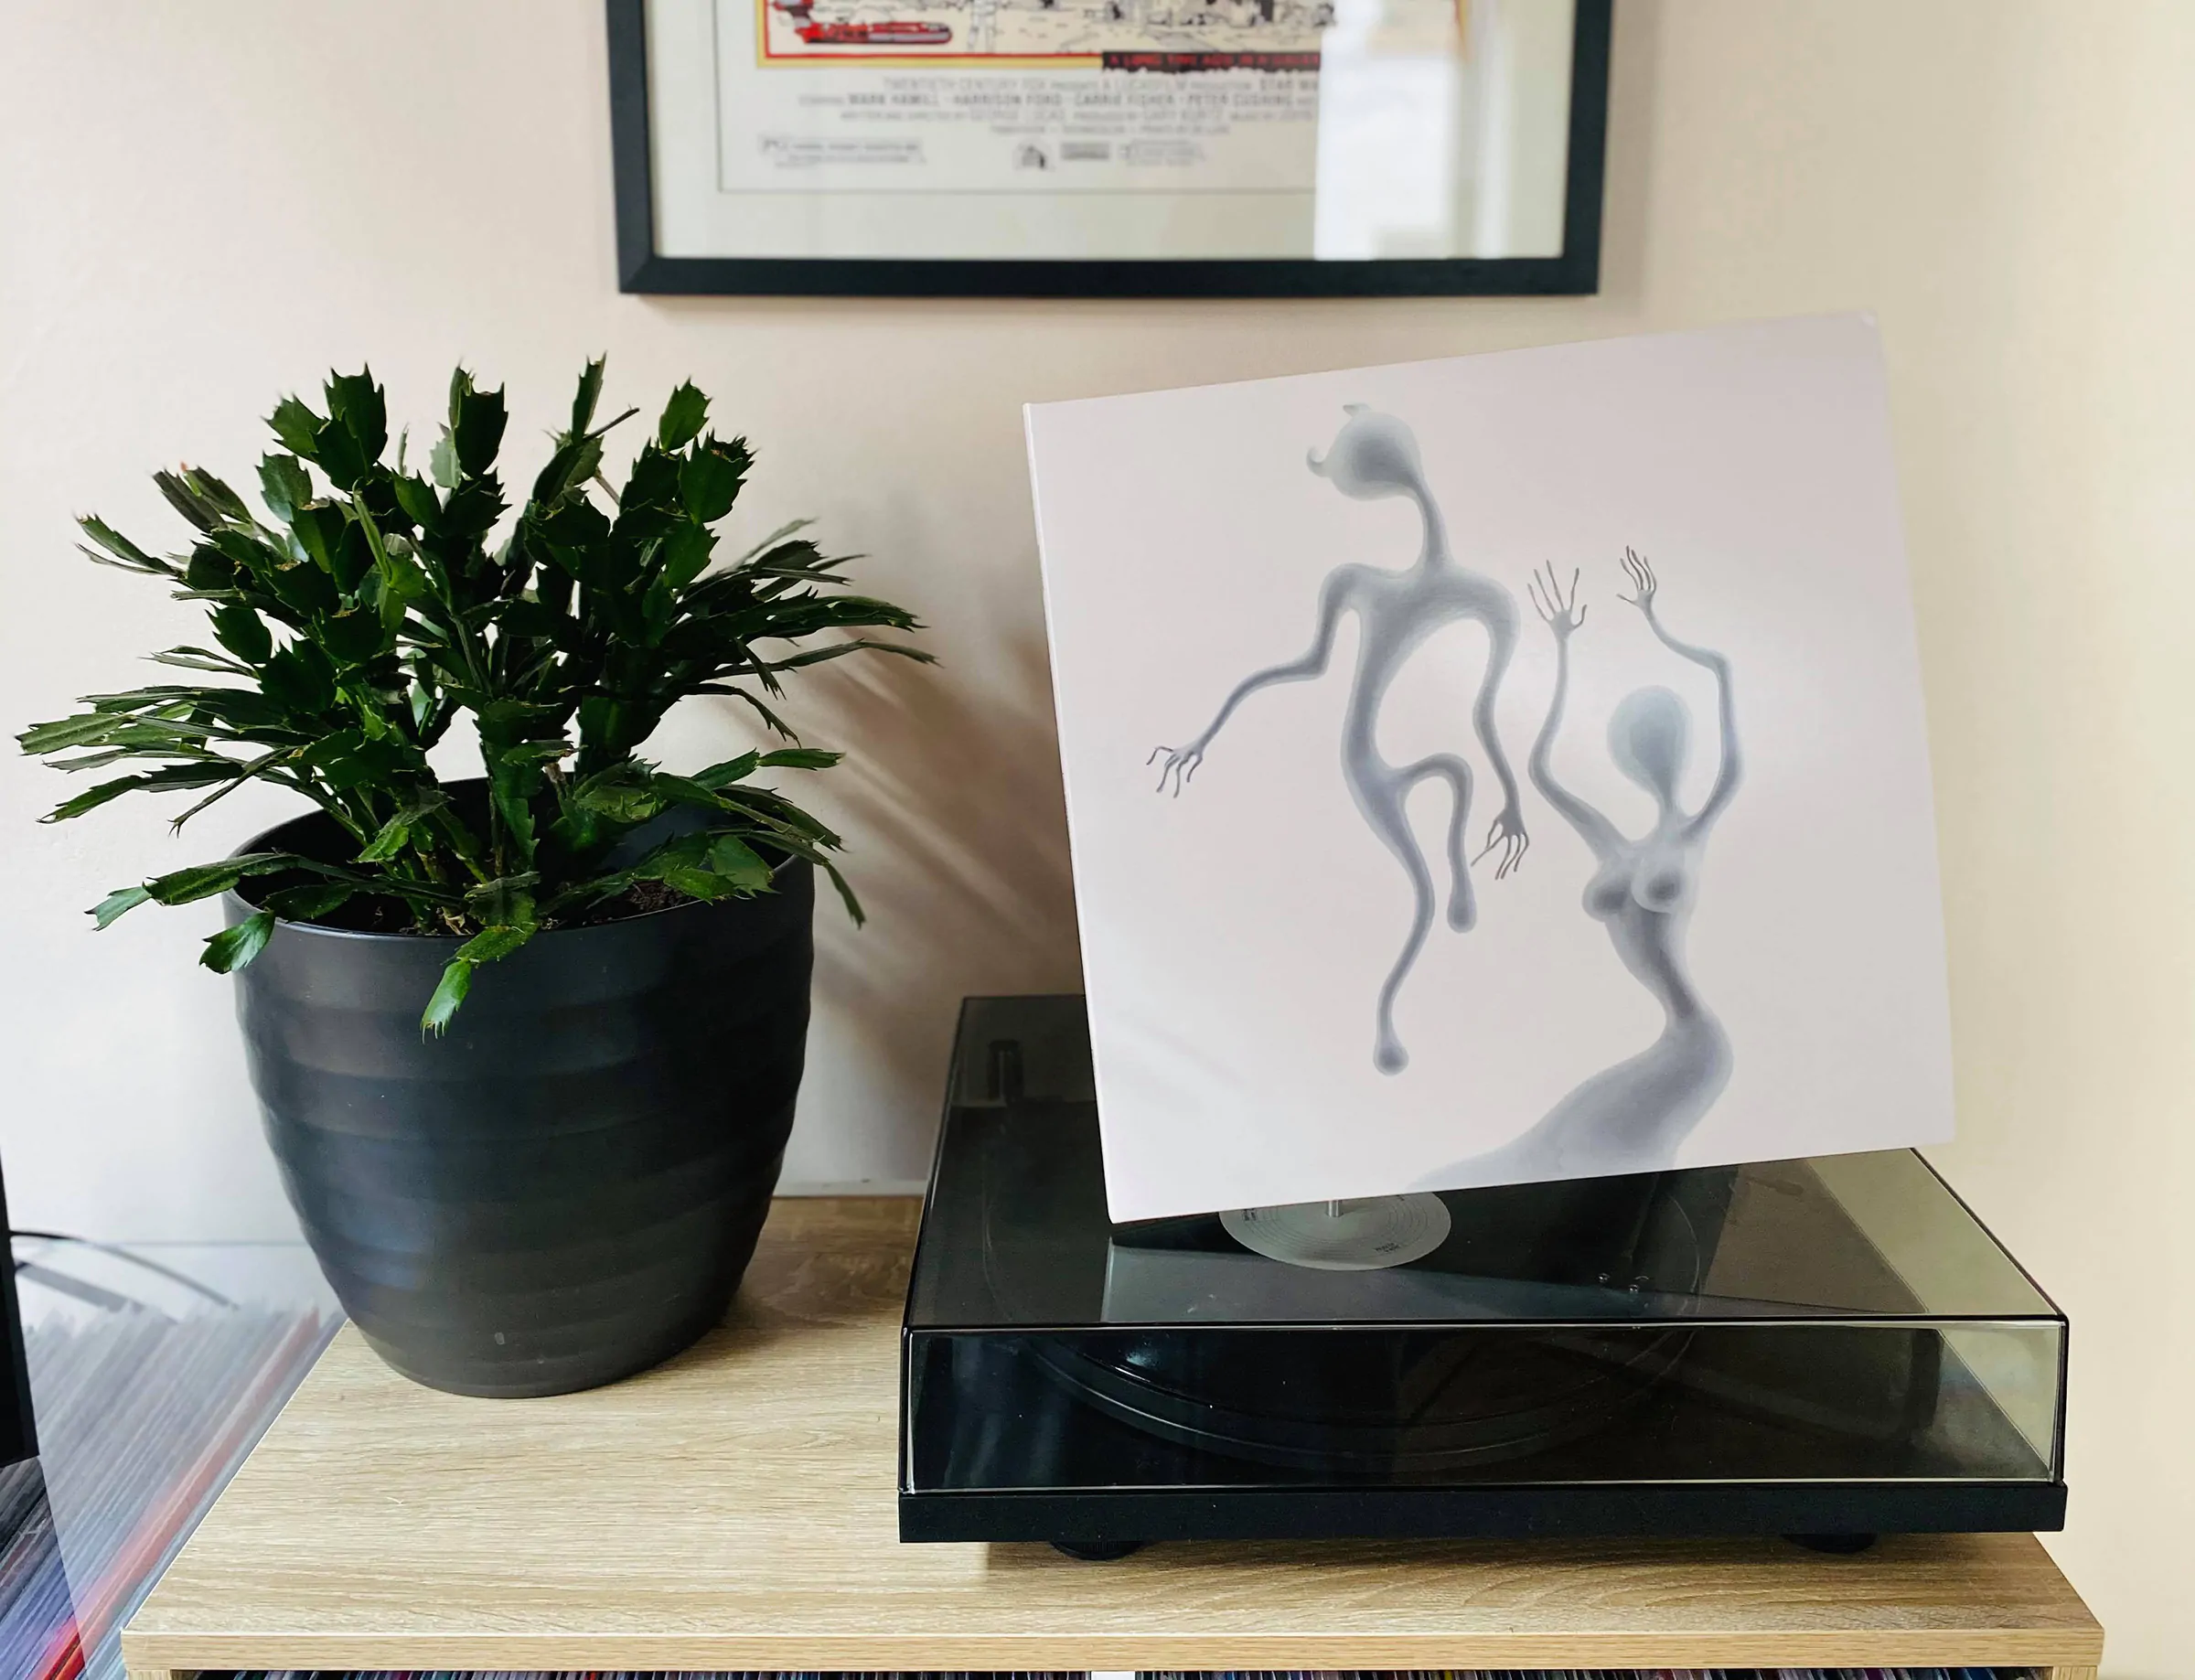 ON THE TURNTABLE: Spiritualized – Lazer Guided Melodies